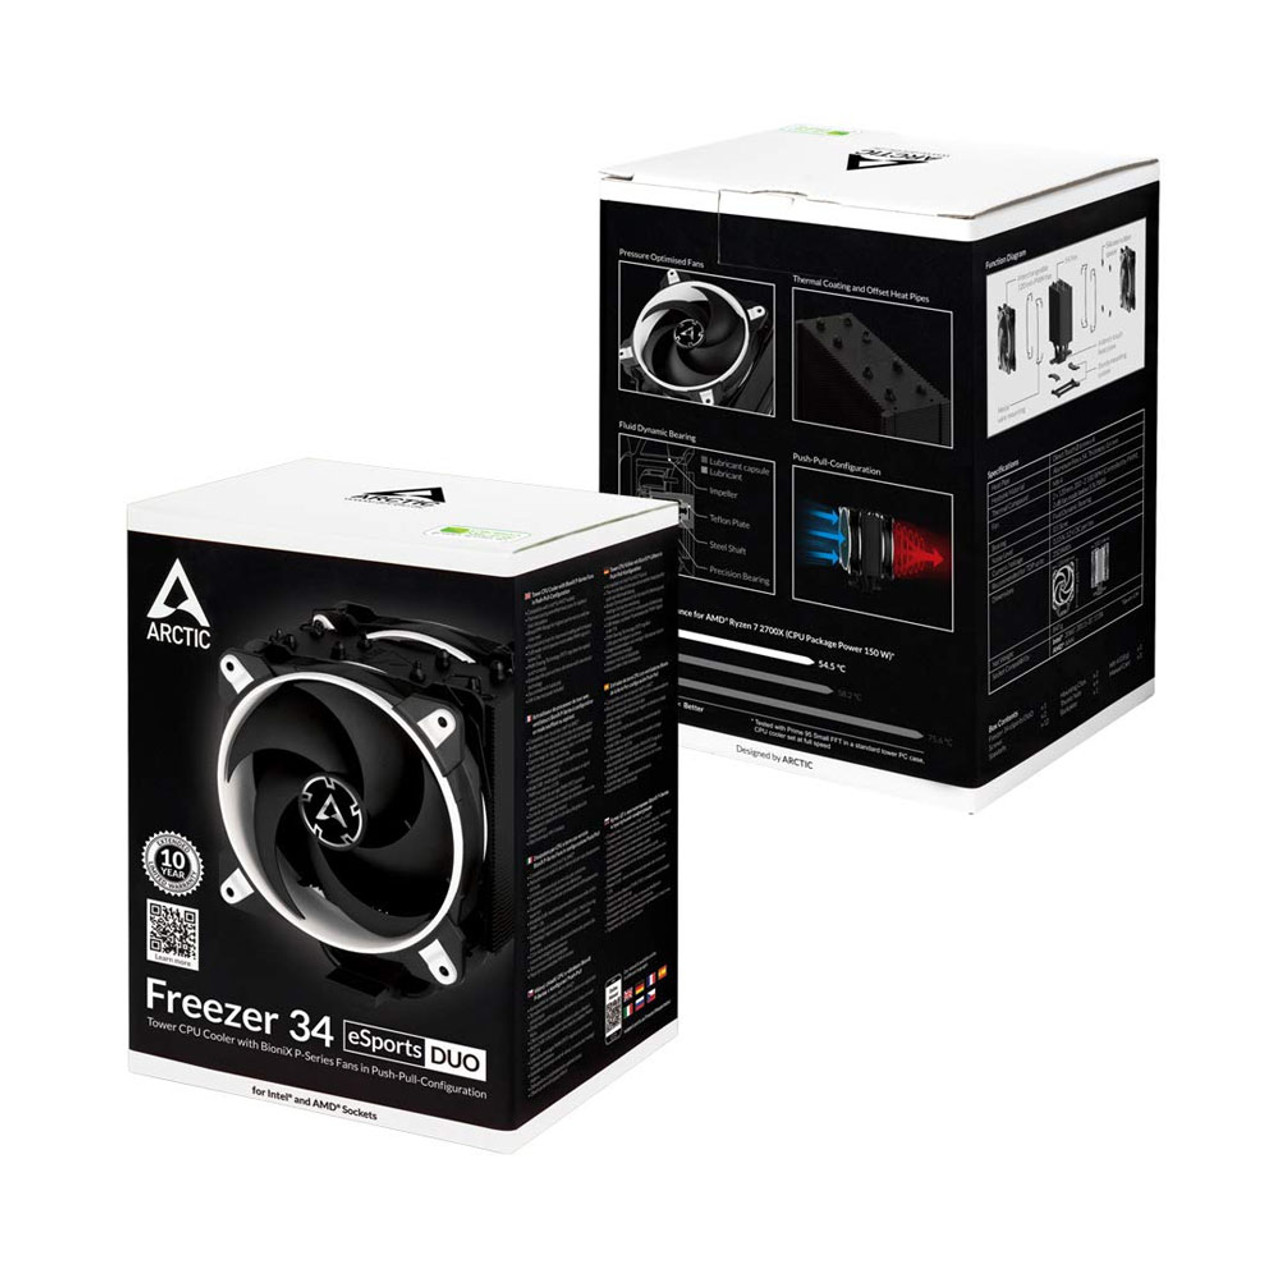 Arctic ACFRE00061A Freezer 34 eSports DUO Edition 120mm 2100RPM Tower CPU Cooler Fans White